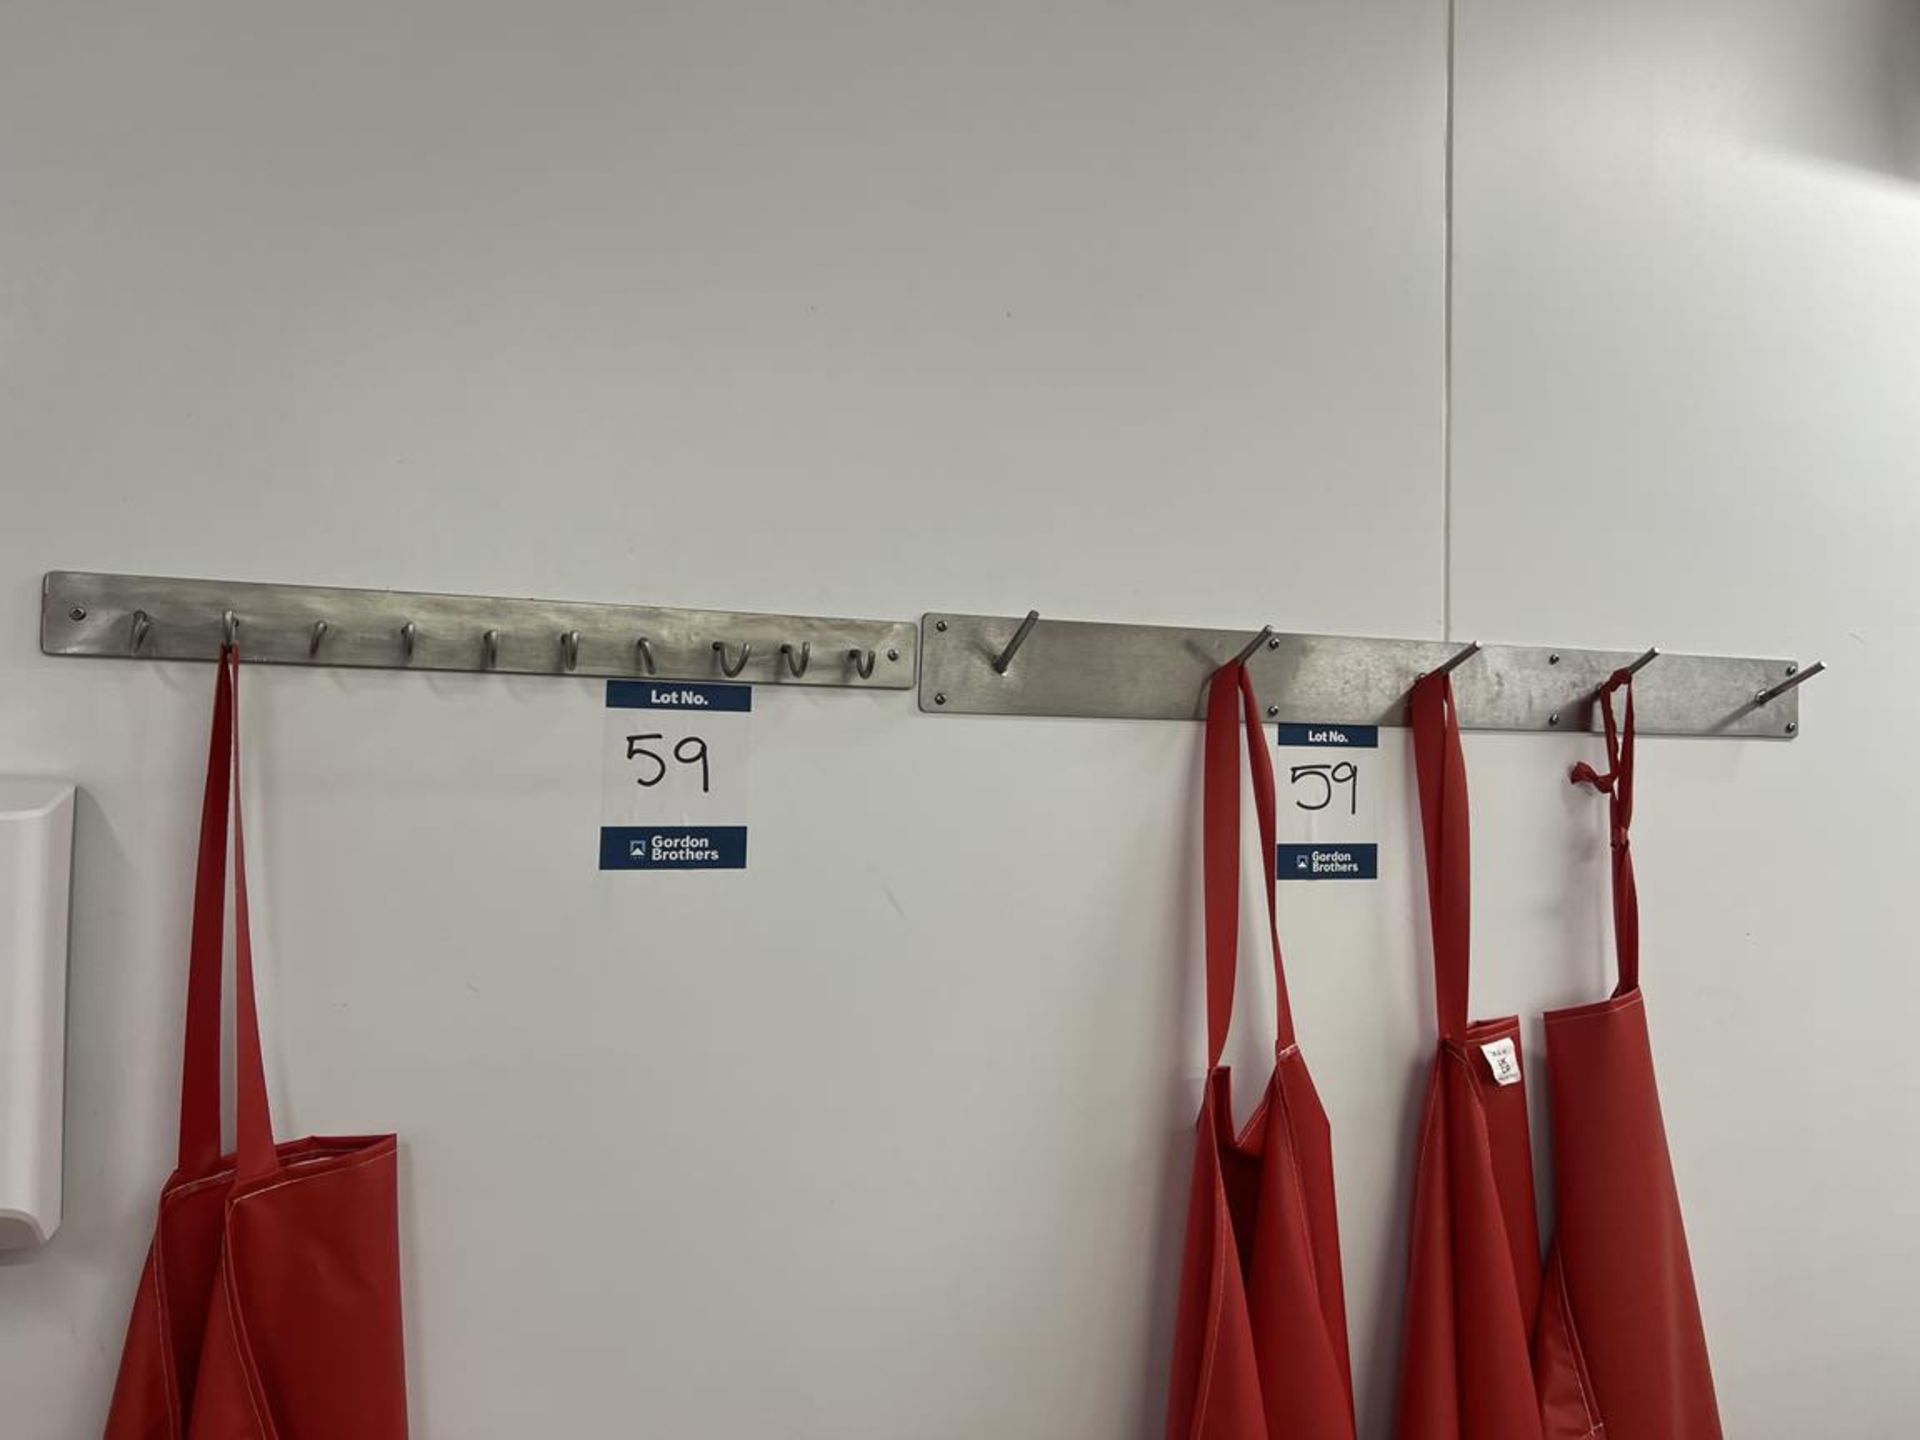 4x (no.) stainless steel wall mounted apron hangers including 2x stainless steel disposable glove